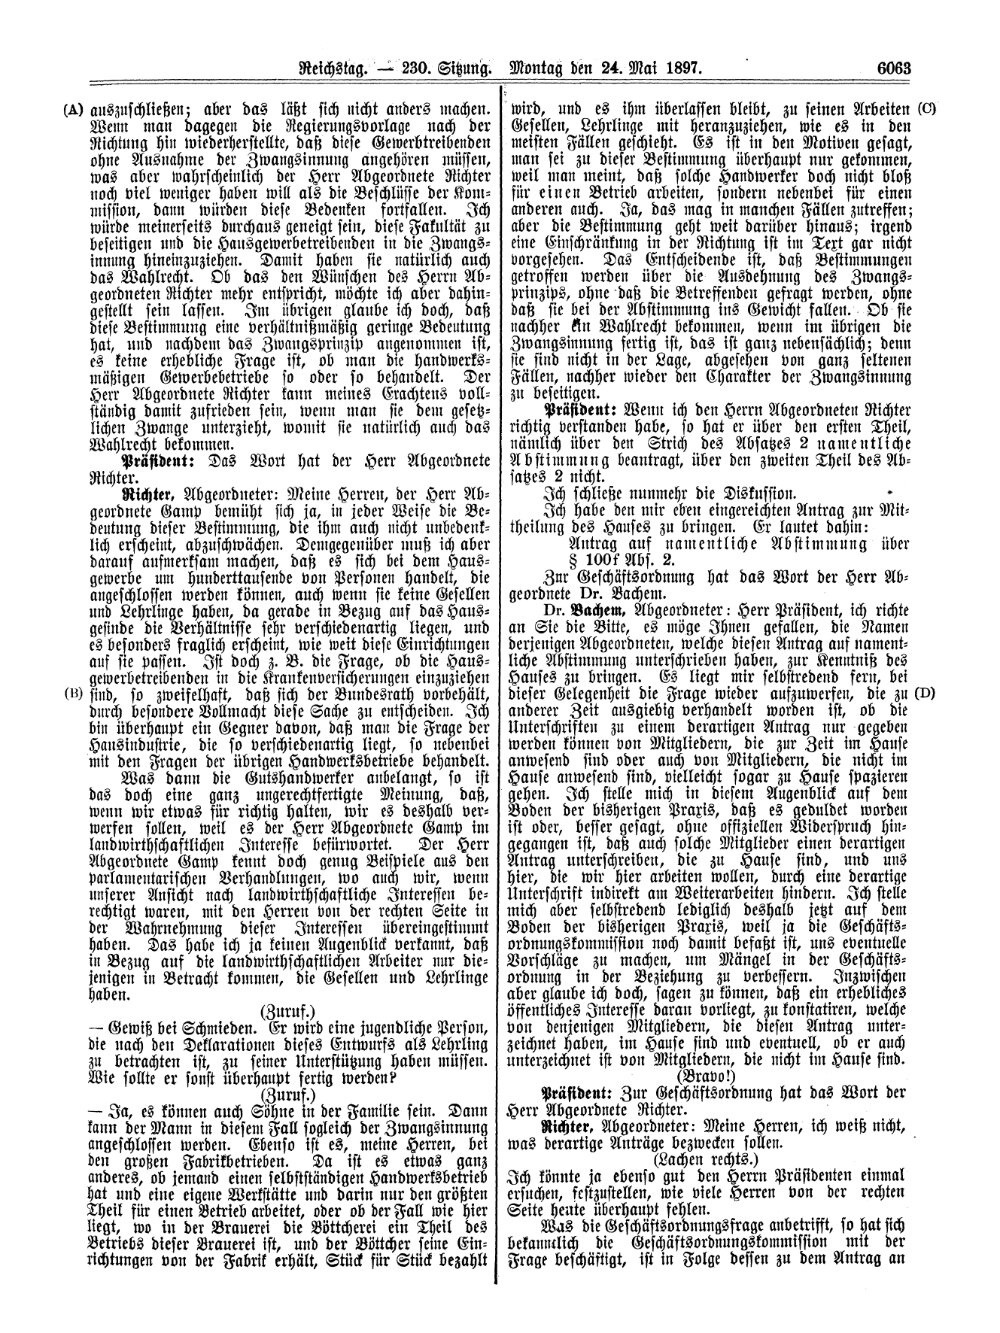 Scan of page 6063